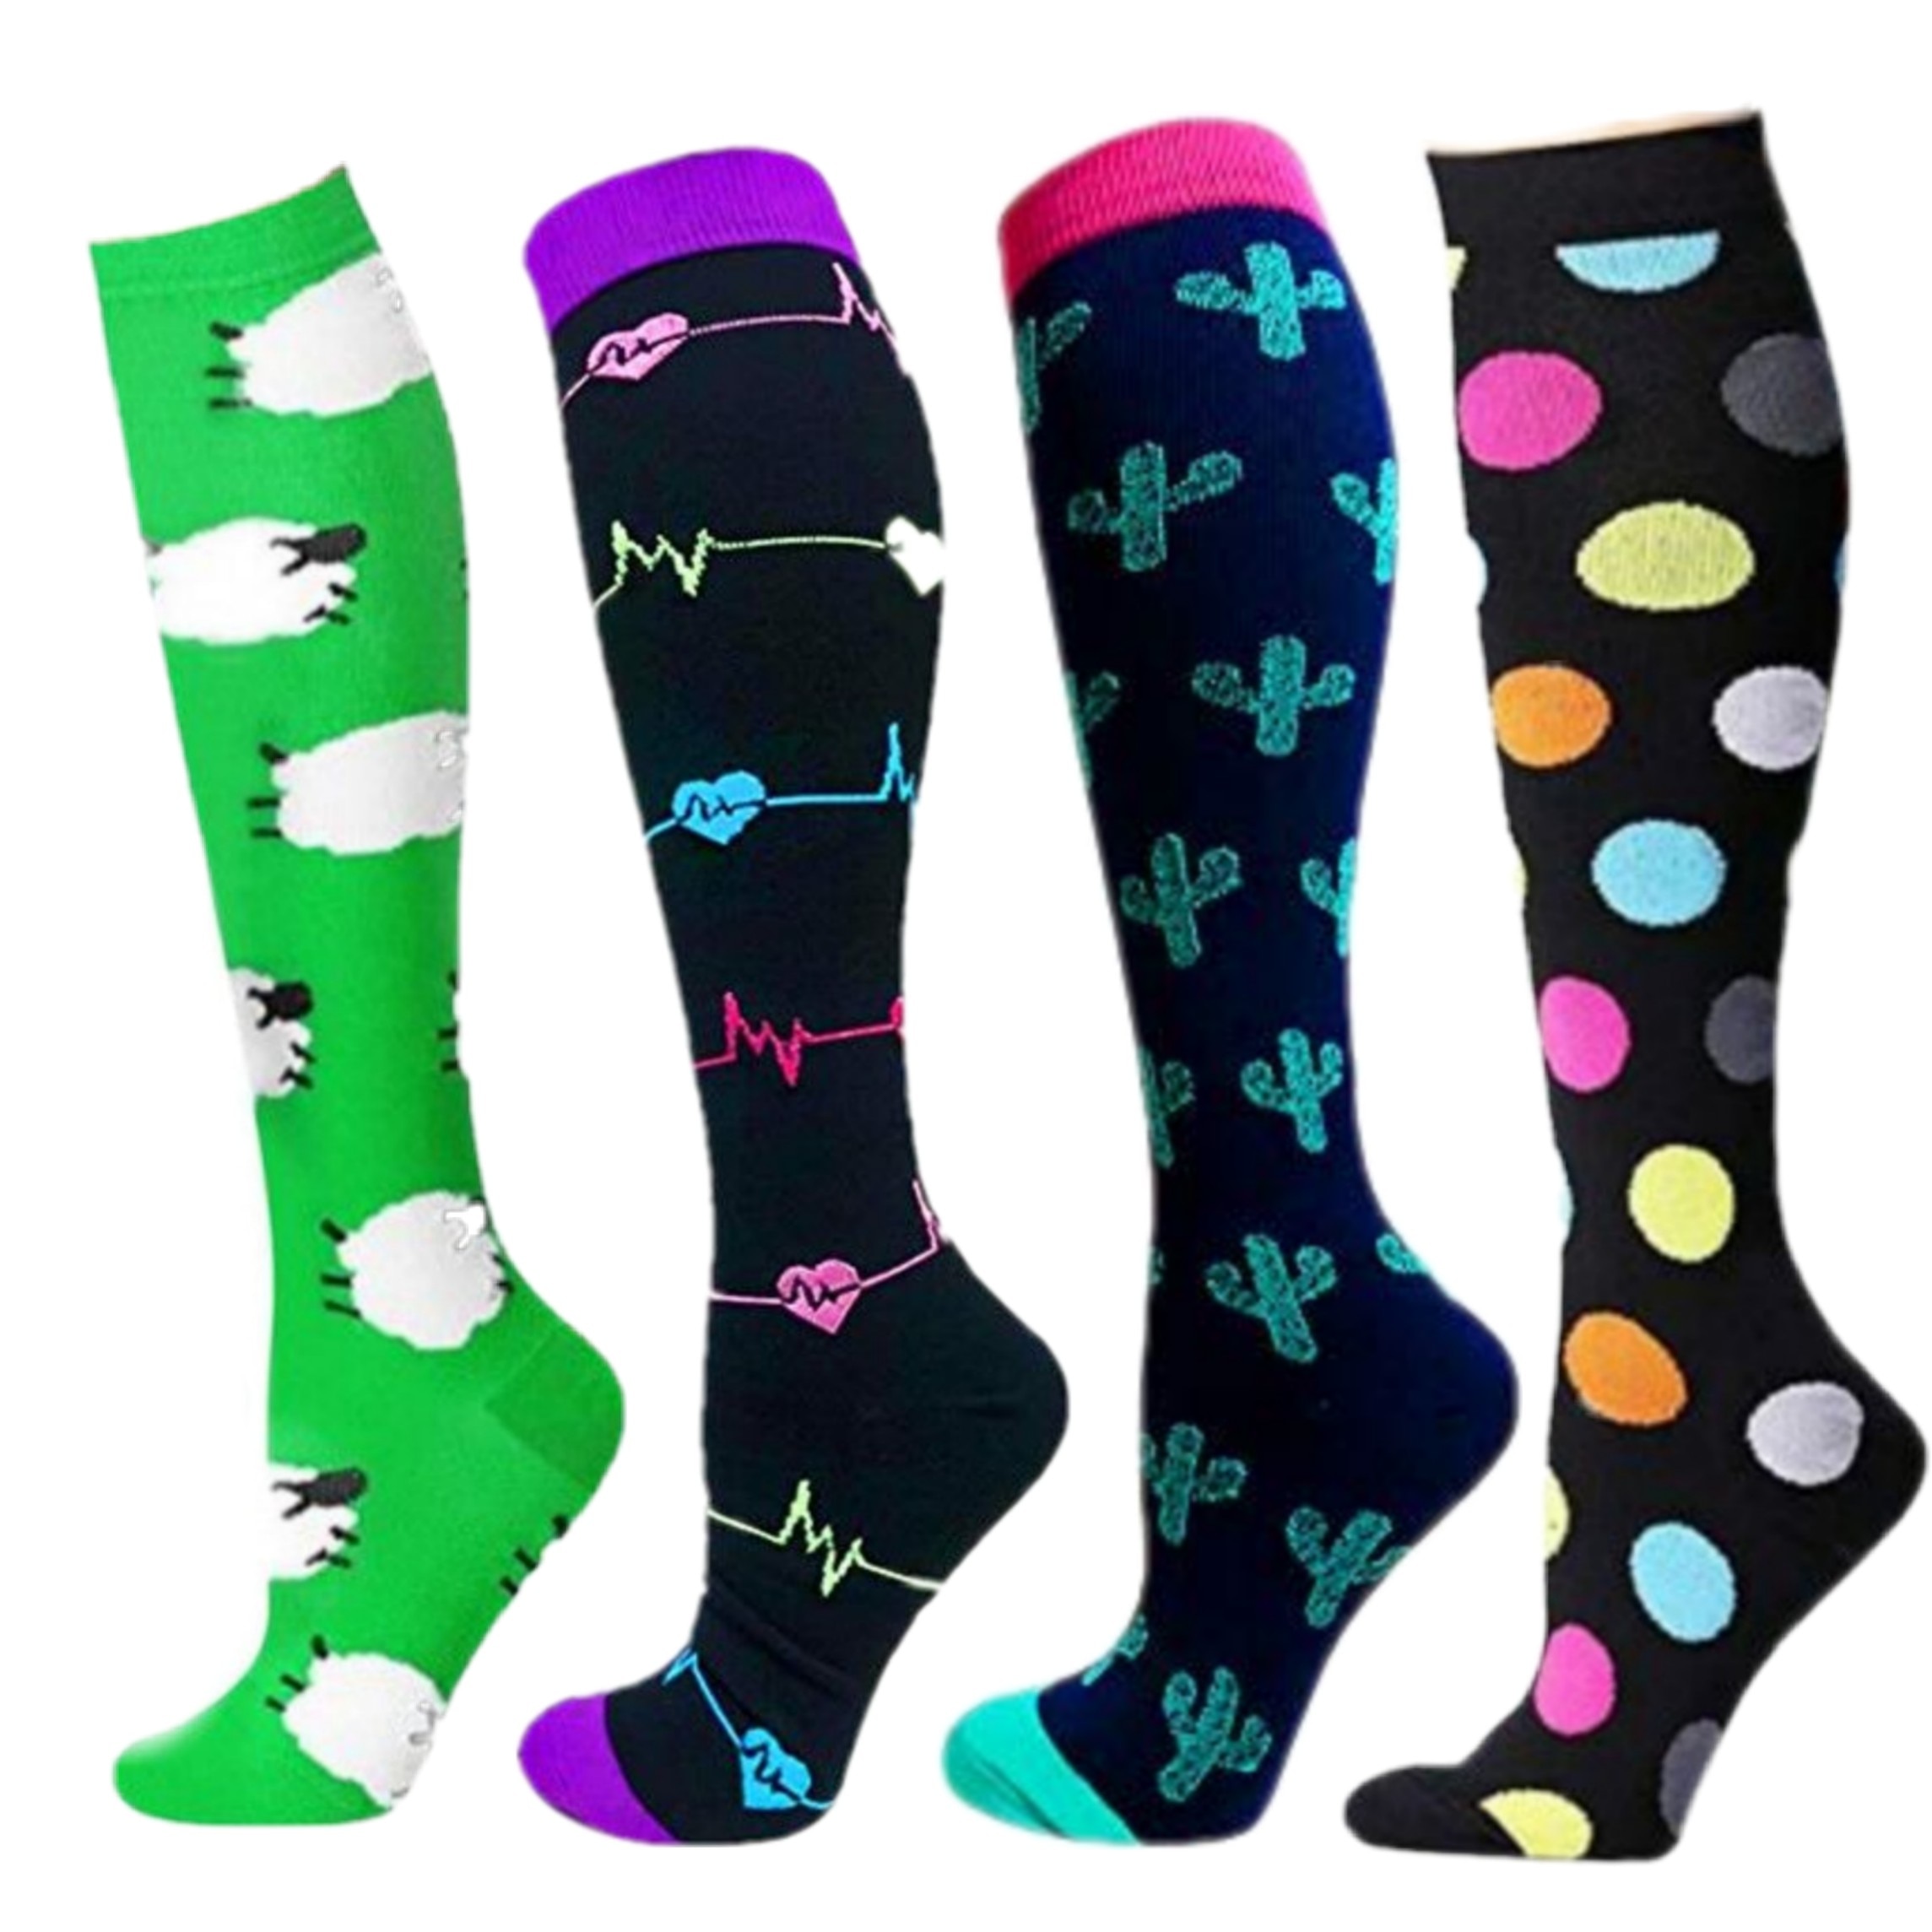 Compression Socks Anti Fatigue Pain Relief Travel Cycling Socks Rugby Basketball Golf Hiking Running For Varicose Veins Men Sock